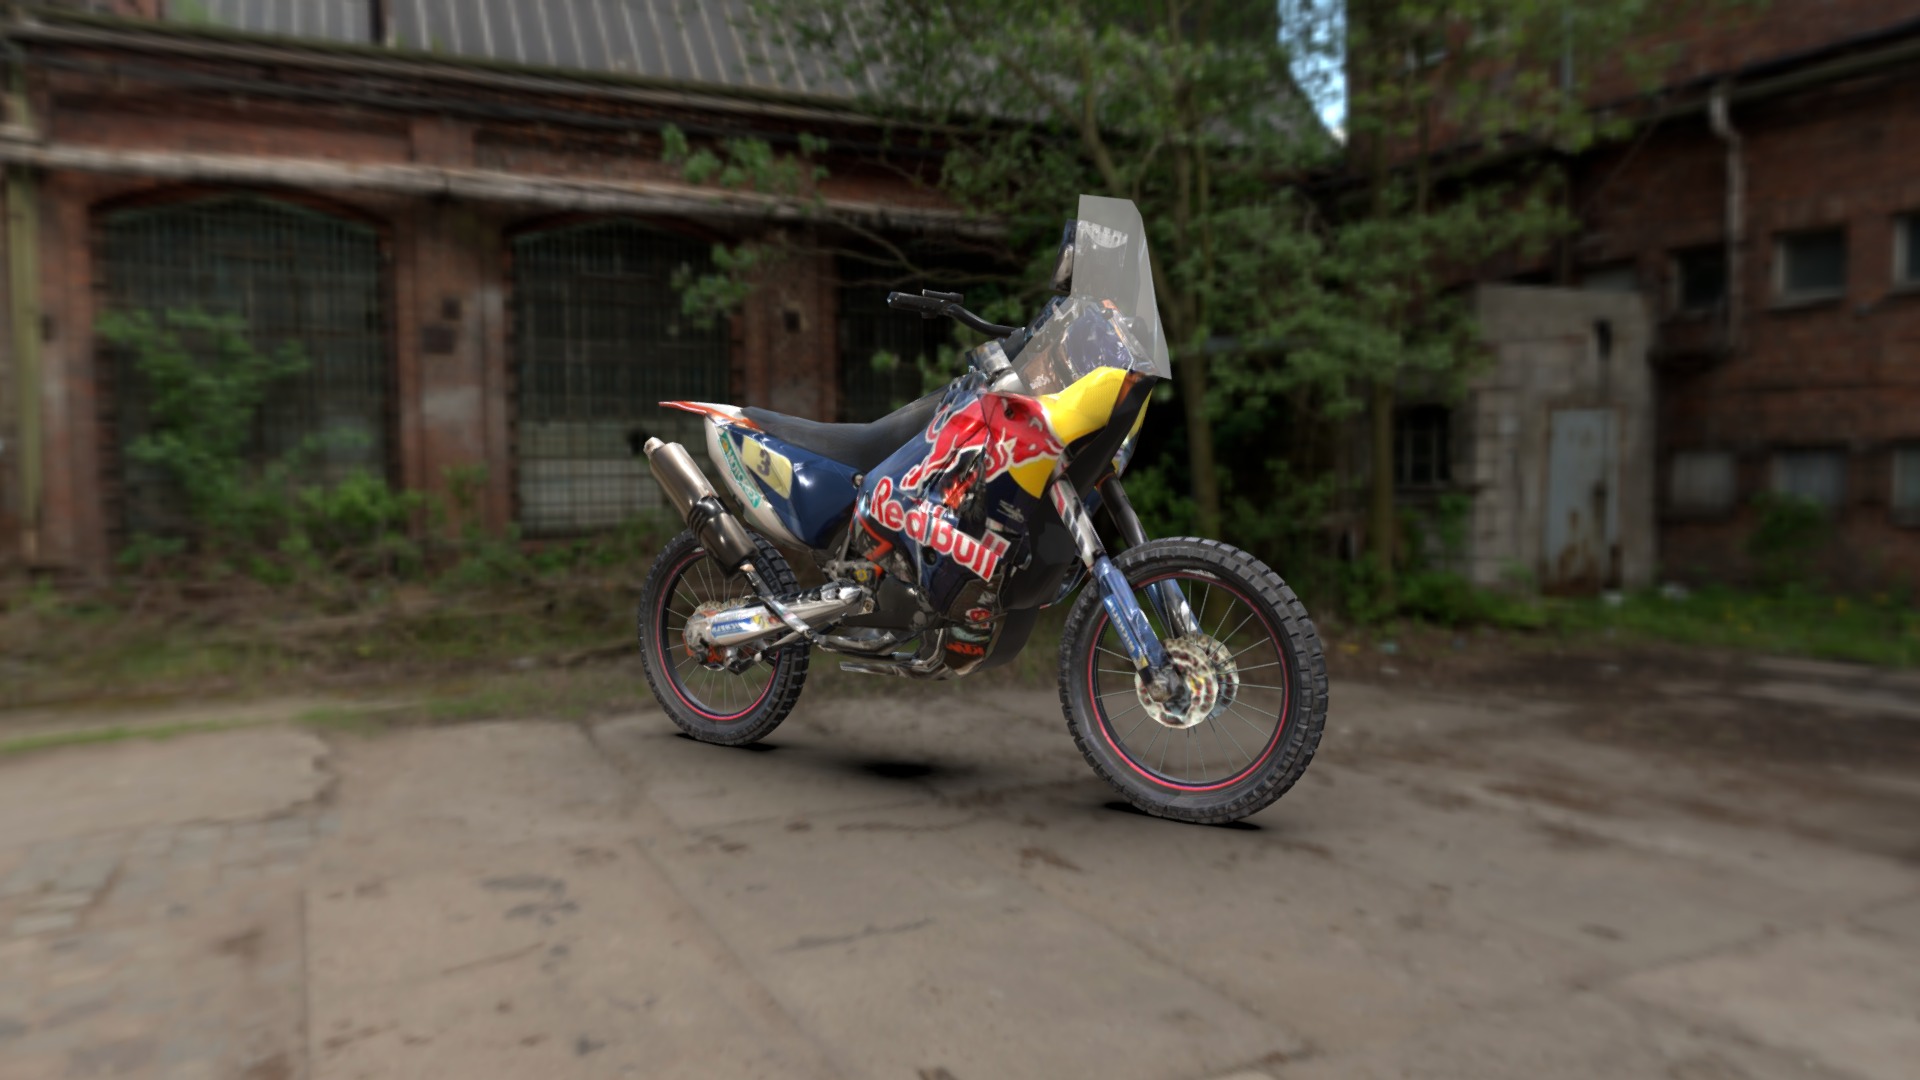 3D model KTM motorcycle - This is a 3D model of the KTM motorcycle. The 3D model is about a motorcycle parked on a street.